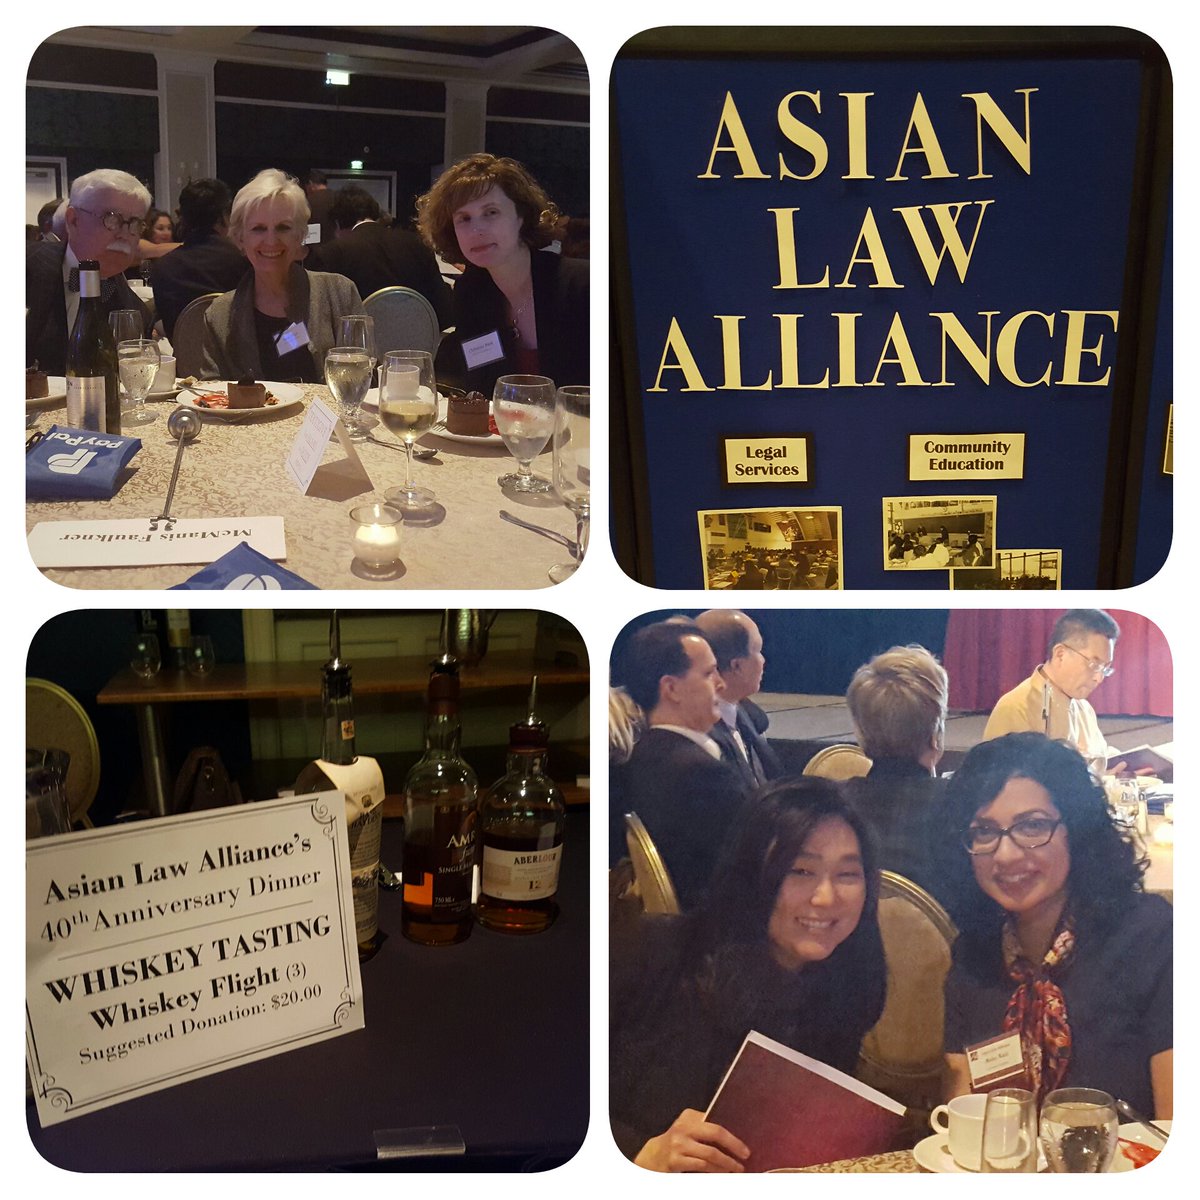 Outstanding evening @AsianLawAlliance’s 40th Anniversary Dinner. We applaud ALA for 40 years of service! #ALA40